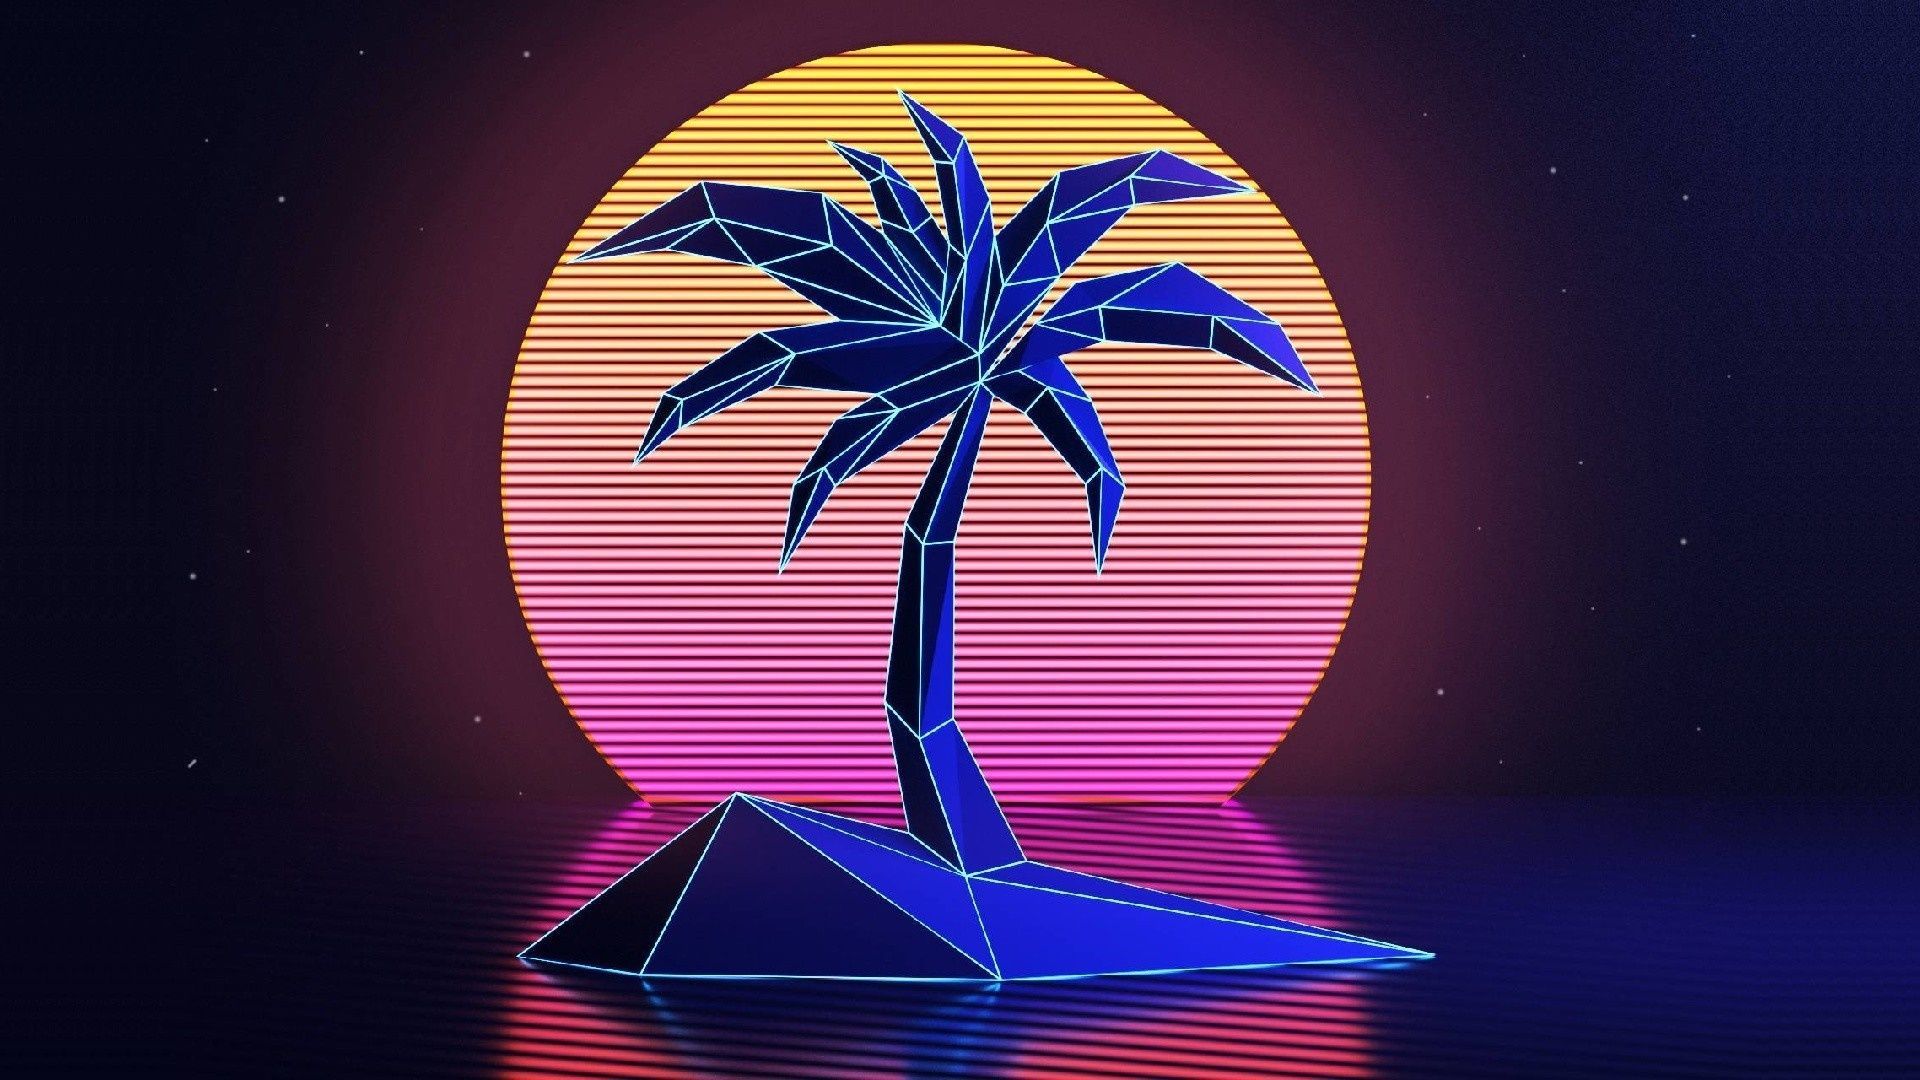 illustration, sunset, night, neon, blue, palm trees, Retro style, New Retro Wave, VHS, vintage, 1980s, vaporwave, color, shape, star, computer wallpaper, atmosphere of earth, astronomical object Gallery HD Wallpaper